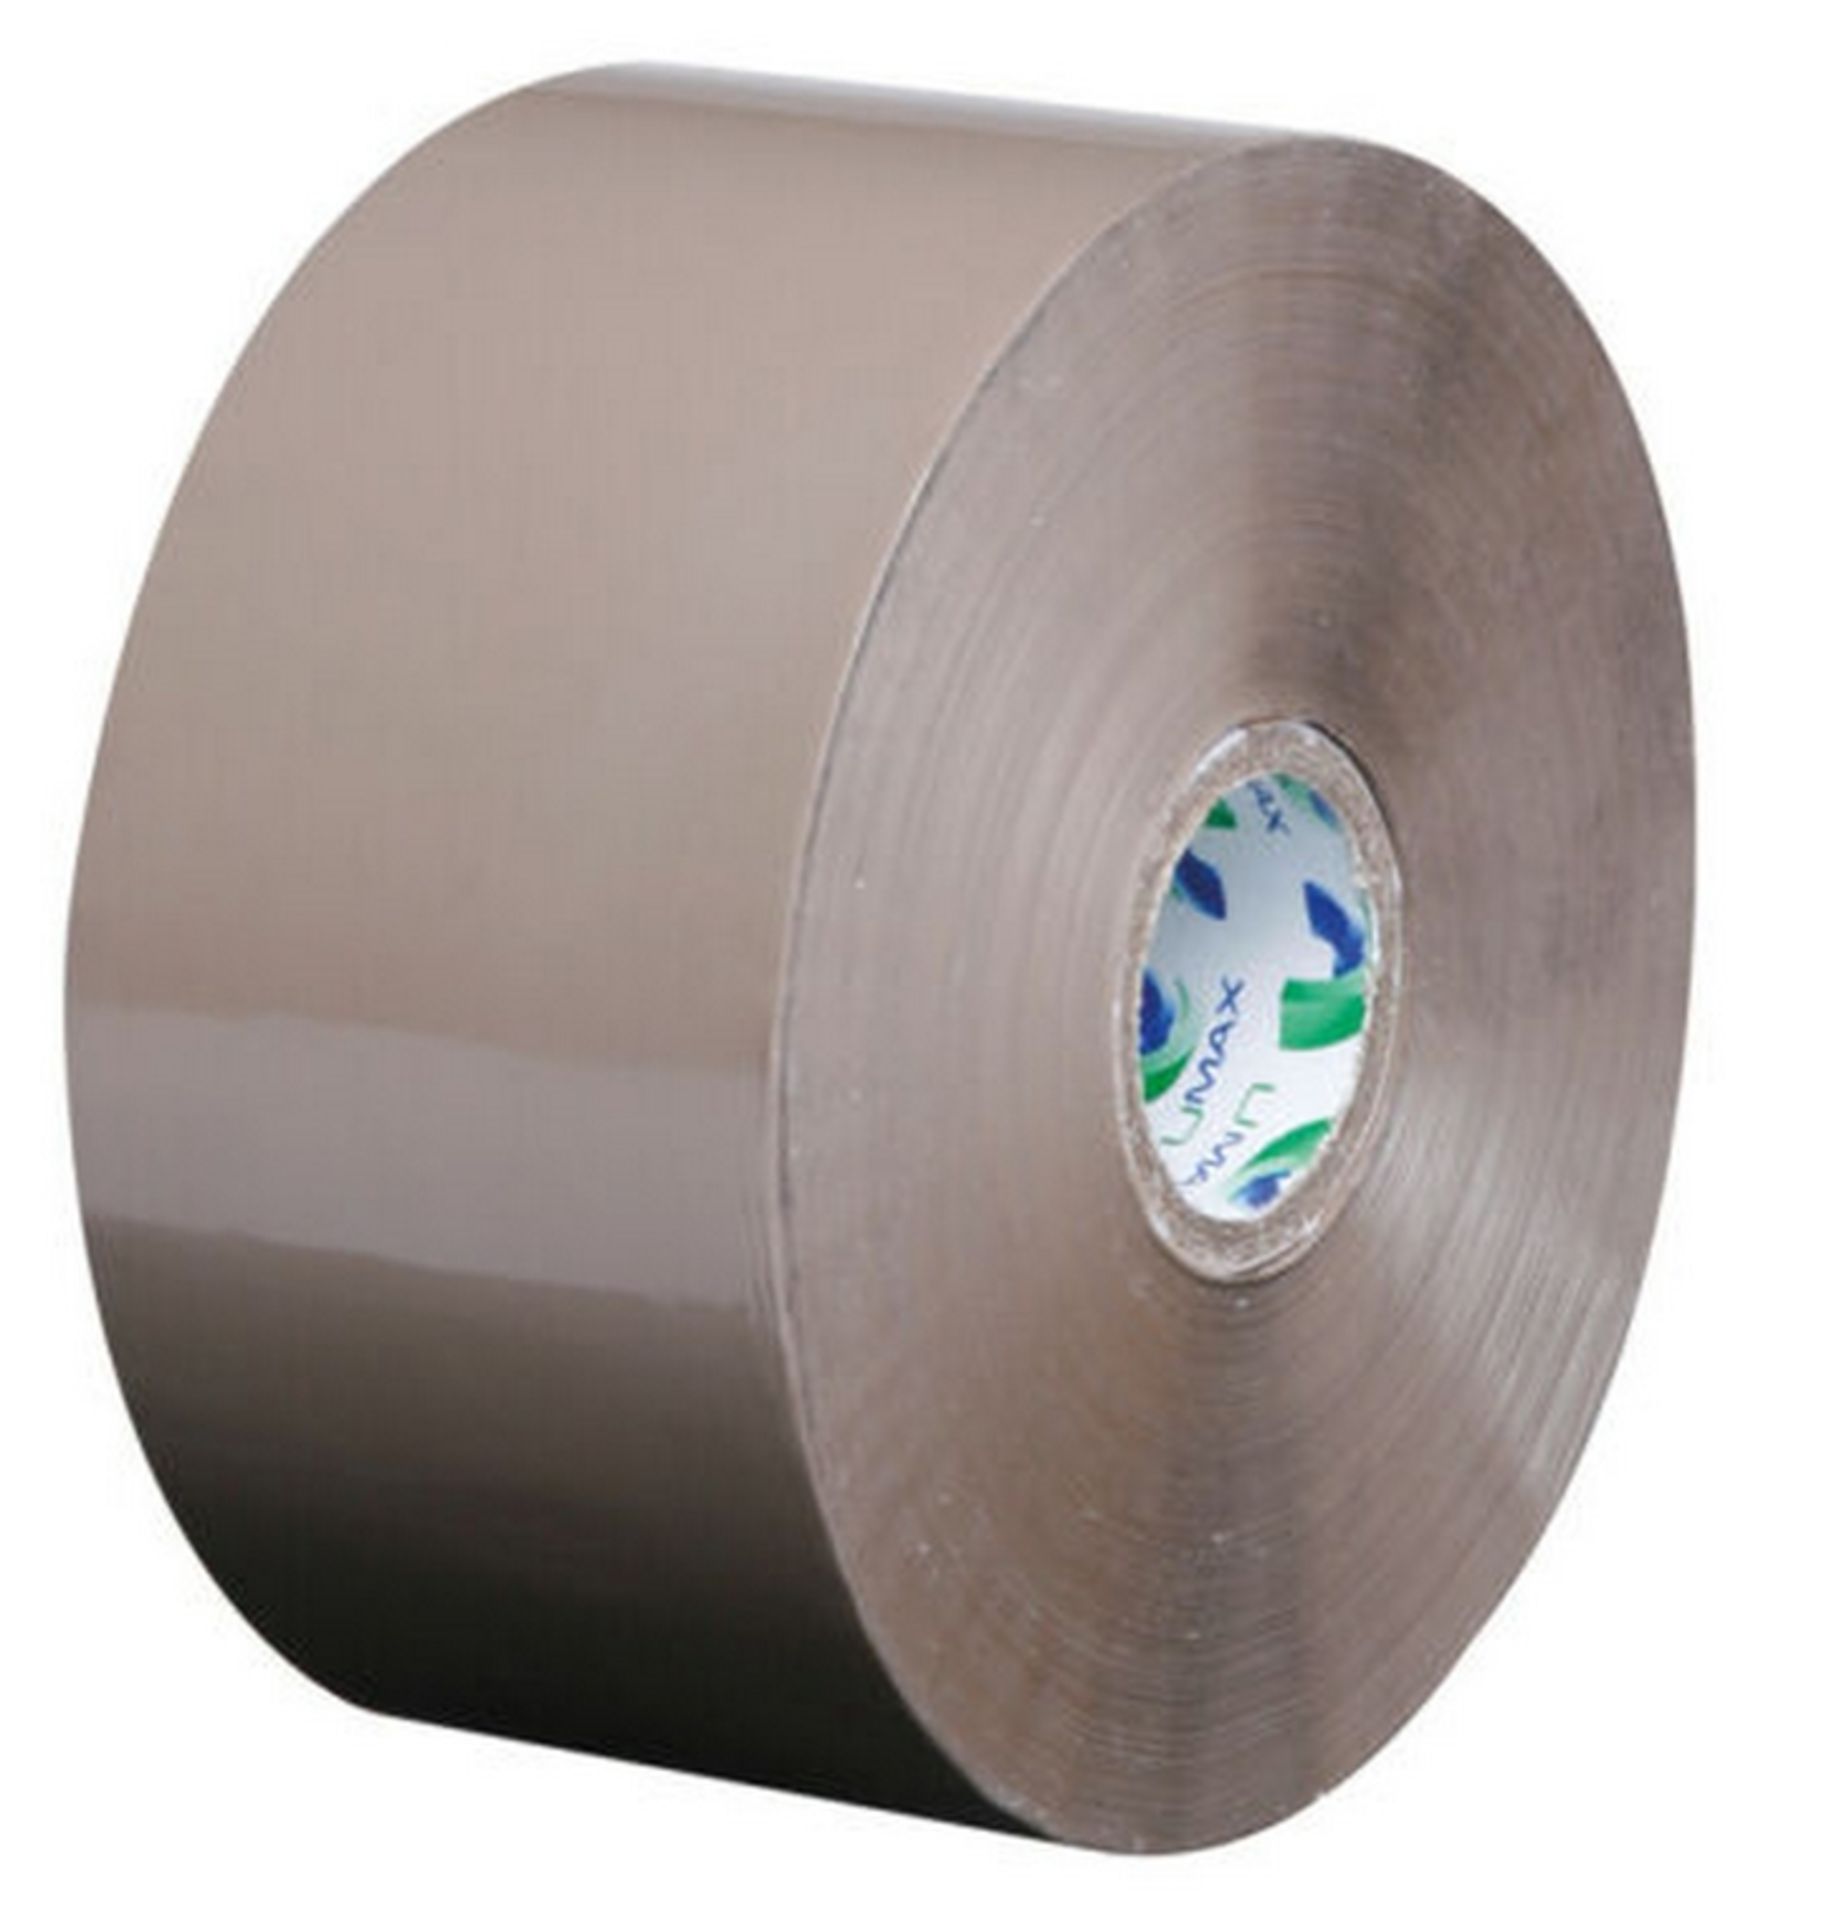 18 ROLLS of top quality buff parcel tape 48mm wide and 150 meters long, - Image 2 of 2